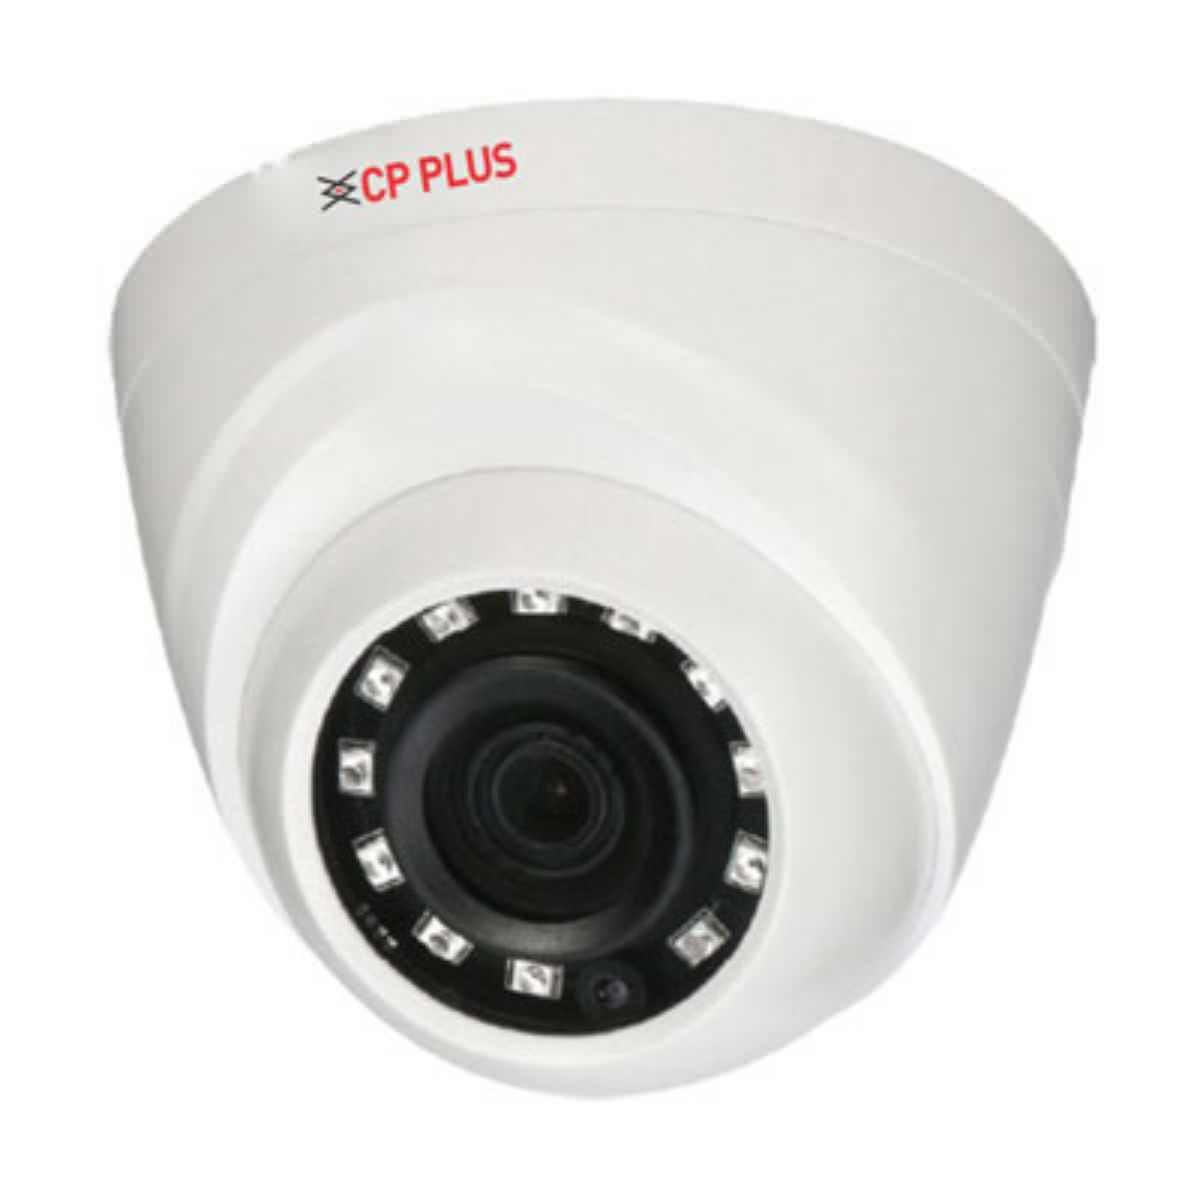 What is Dome Camera and Uses?